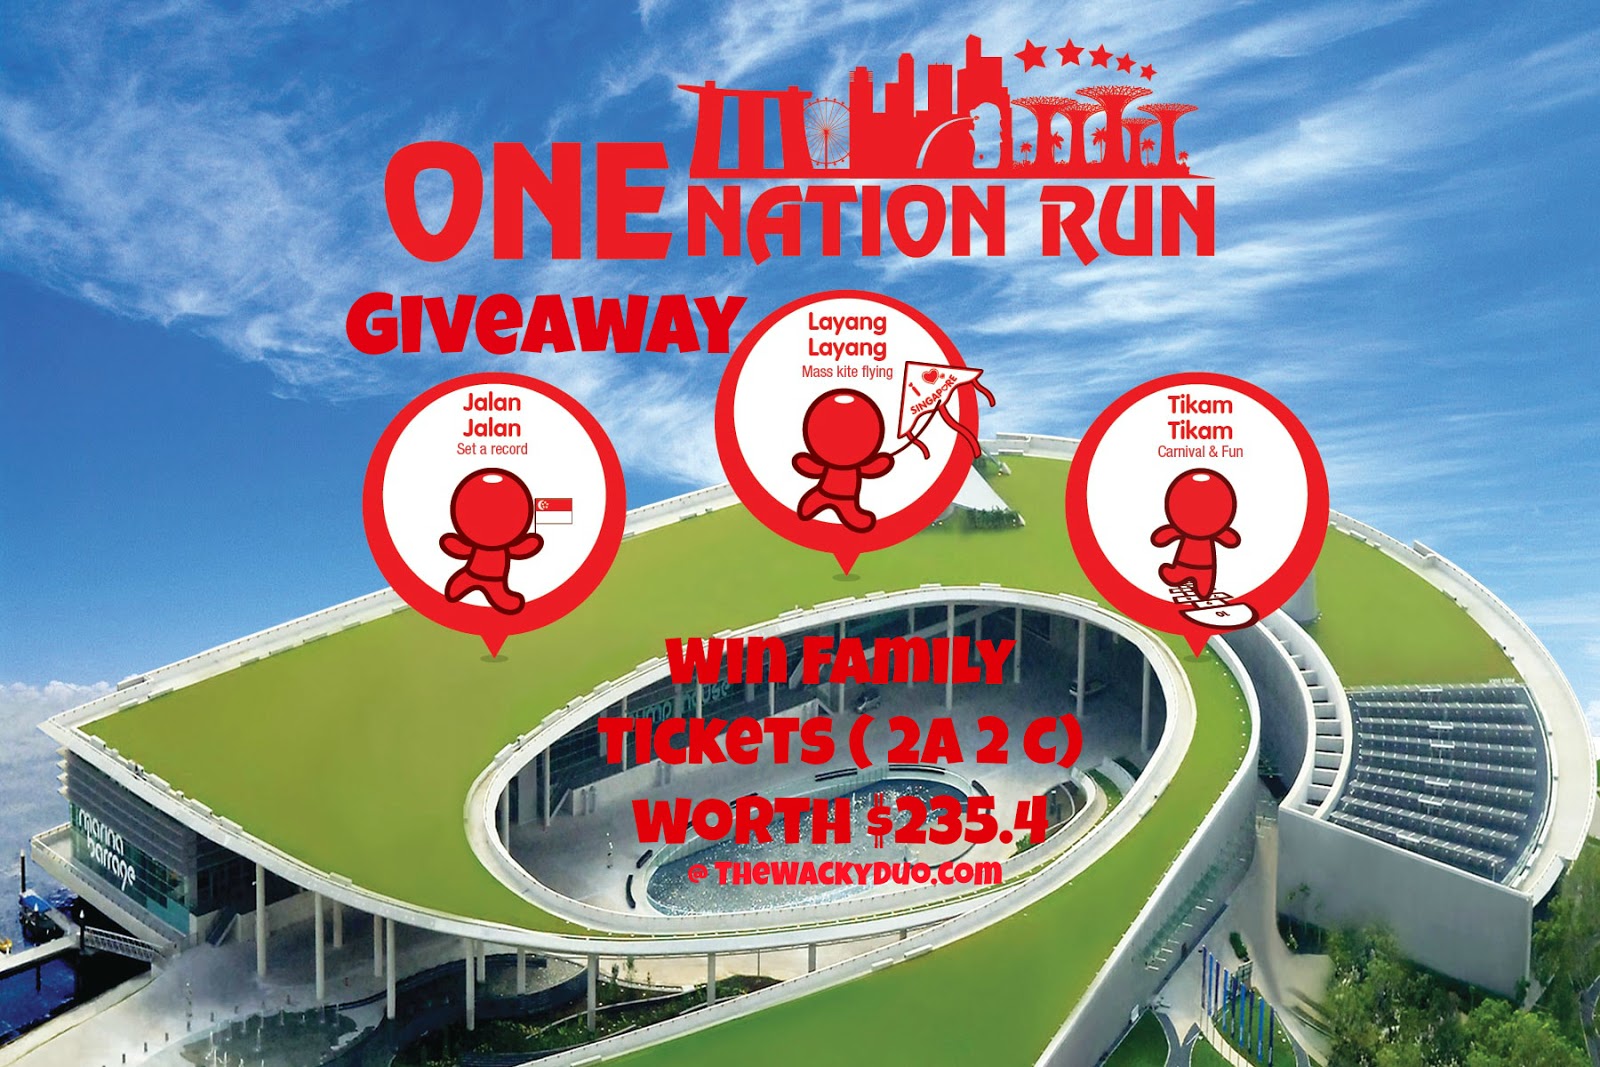 One Nation Run 2016 Giveaway